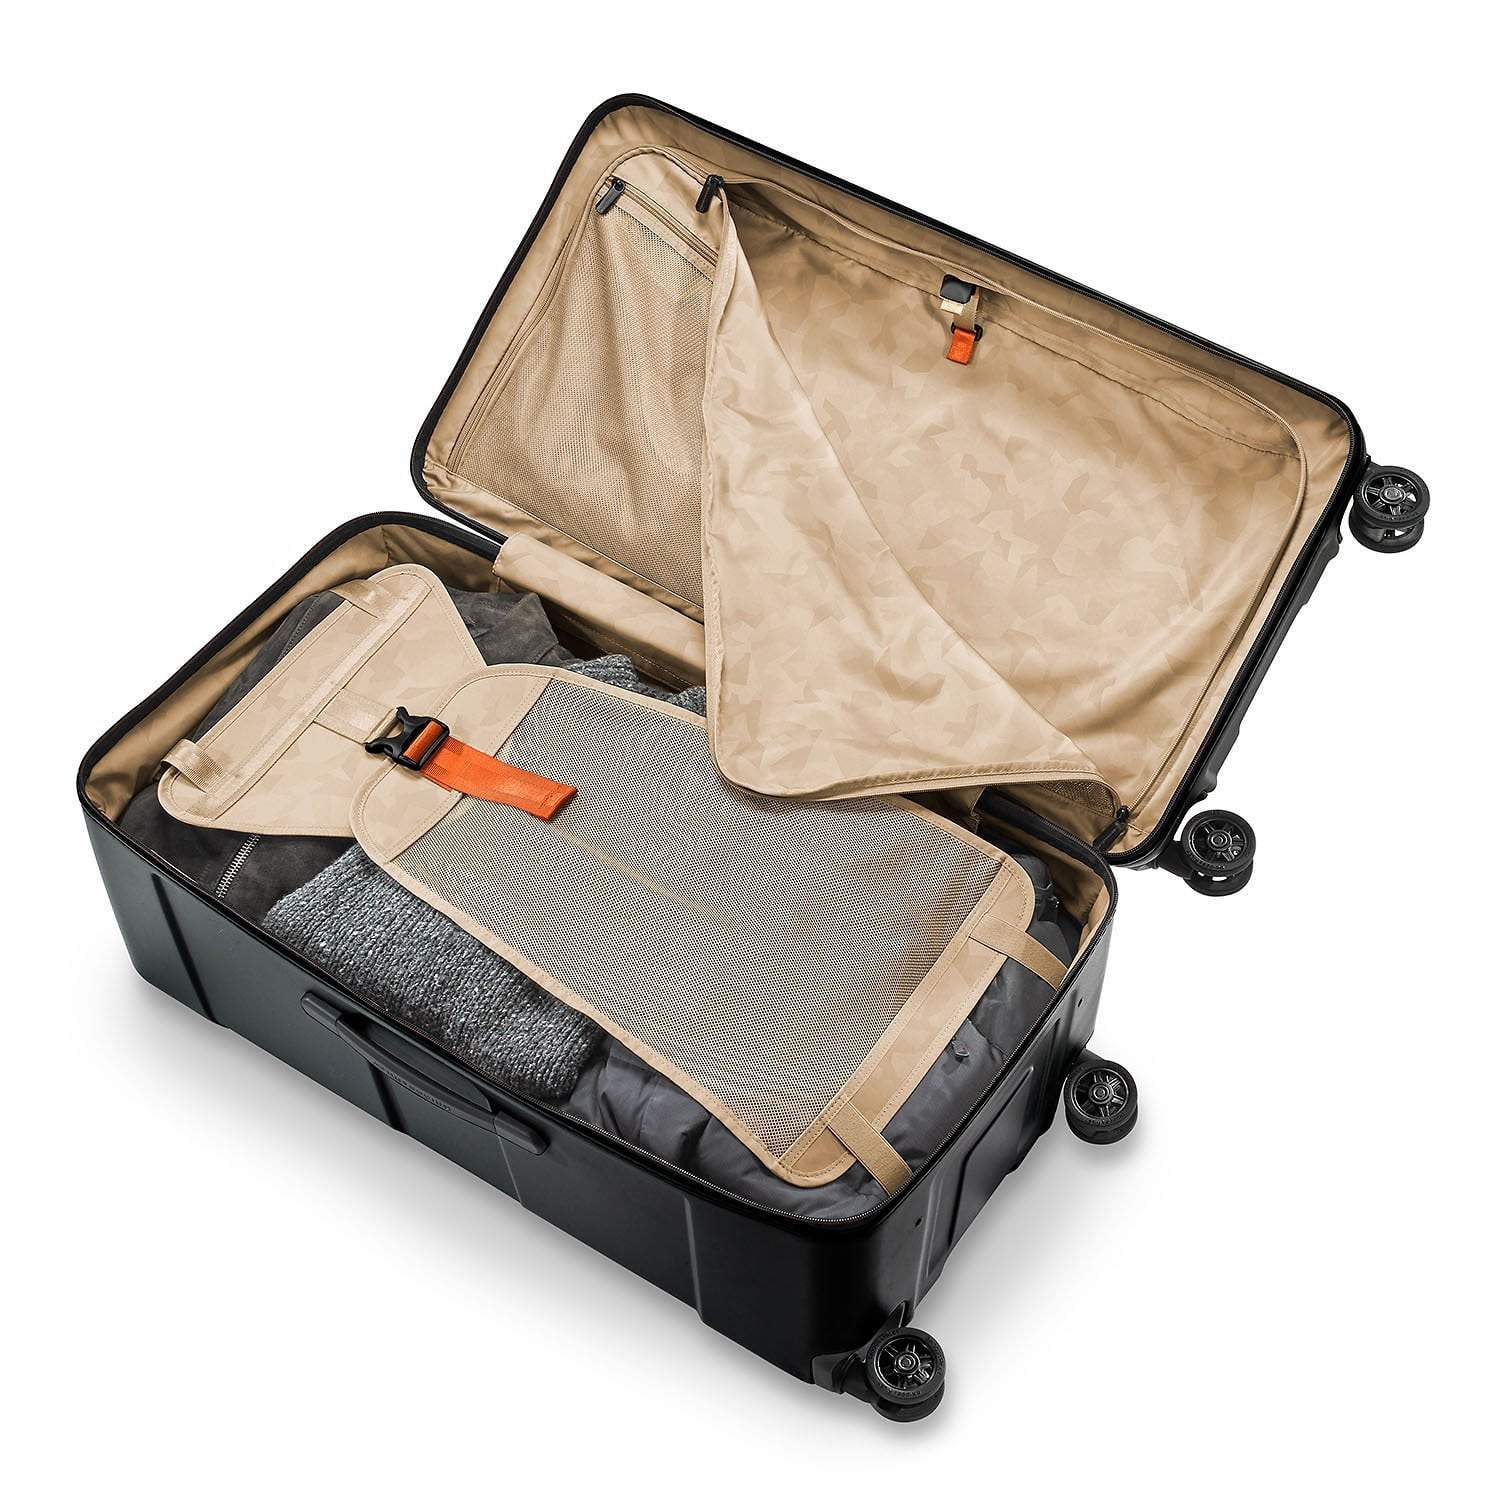 Briggs & Riley Torq Extra Large Trunk Spinner Luggage